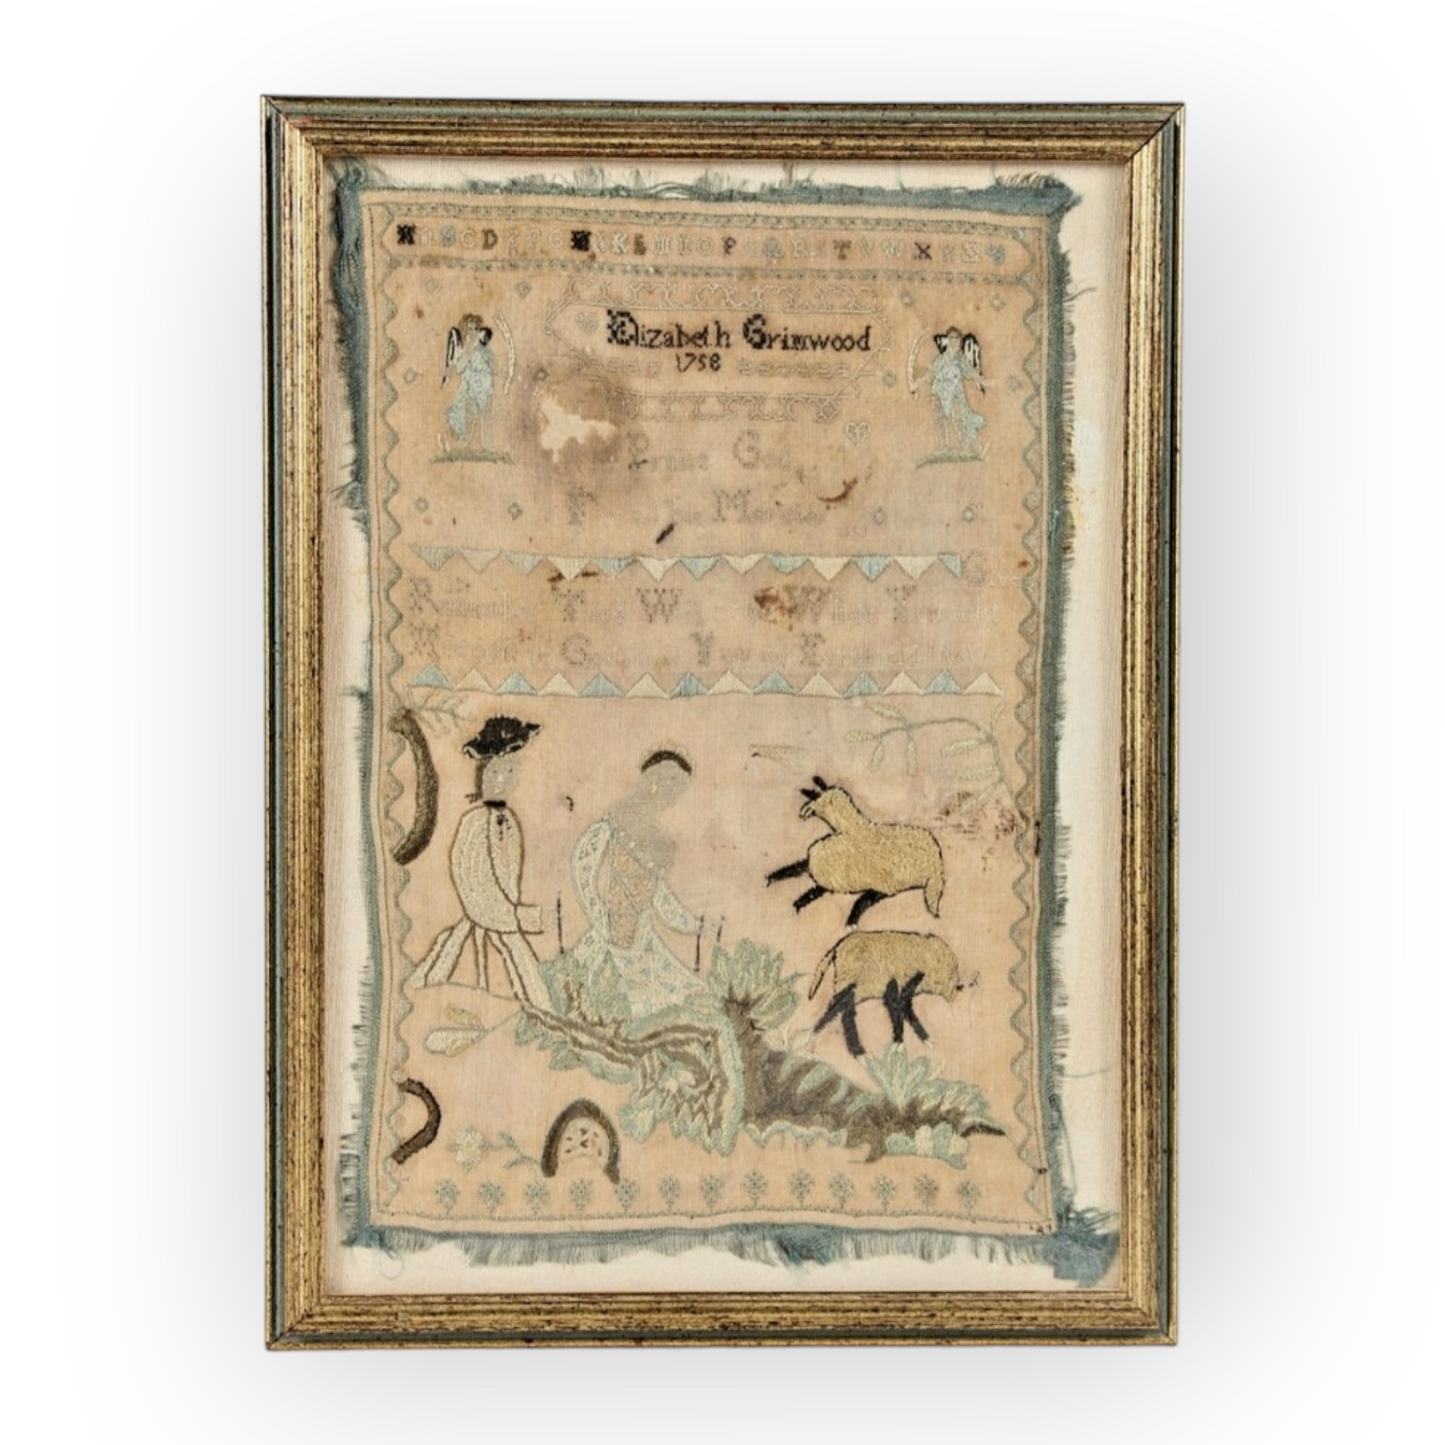 Mid 18th Century English Antique Sampler by Elizabeth Grimwood,  Dated 1758